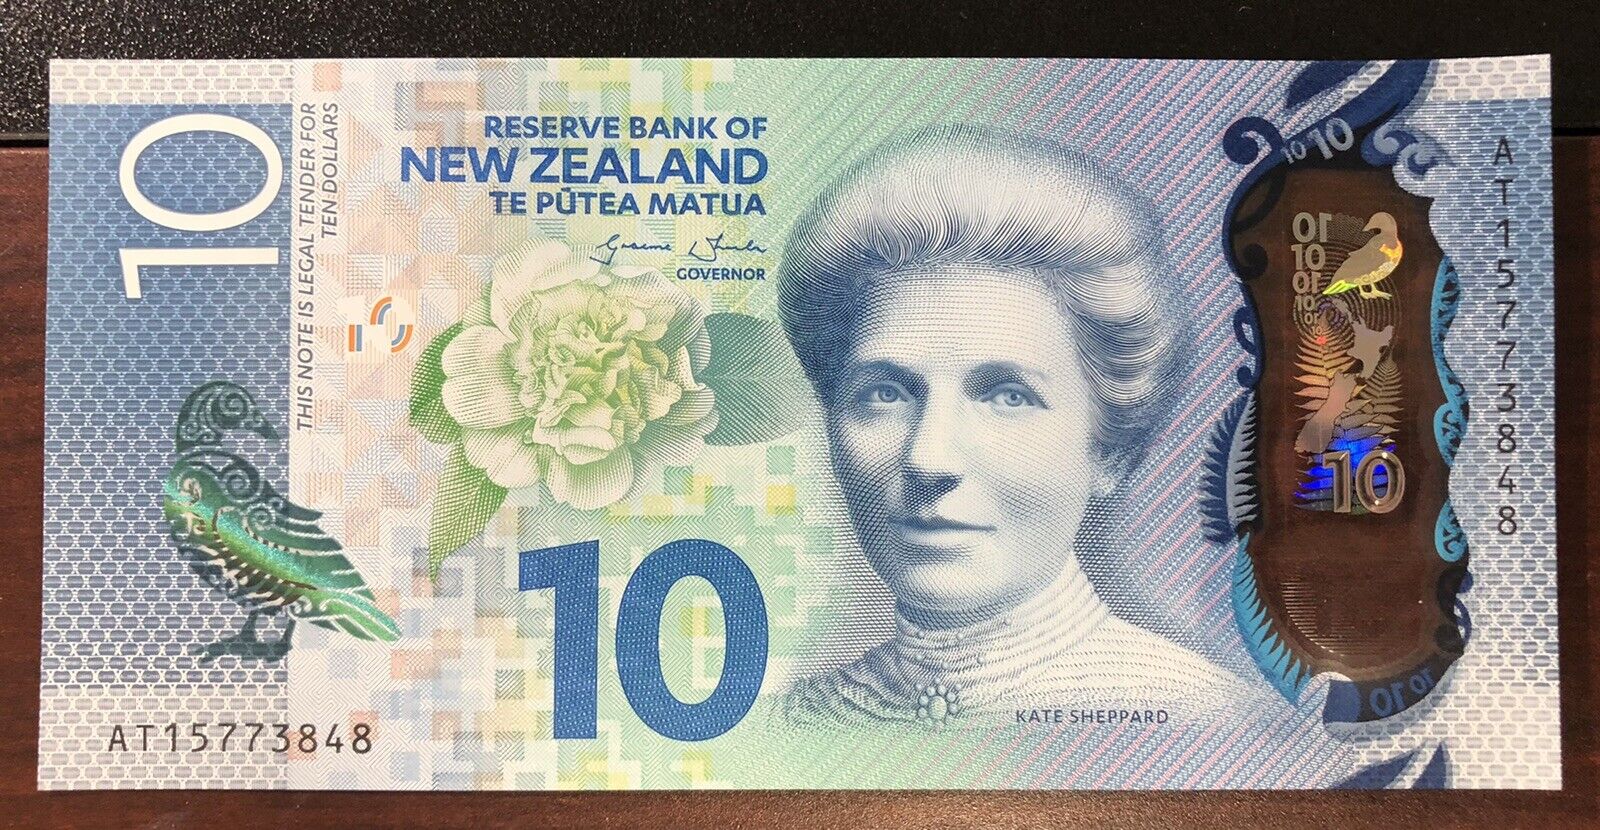 New Zealand 10 Dollars P 192 2015 Unc Polymer Note,